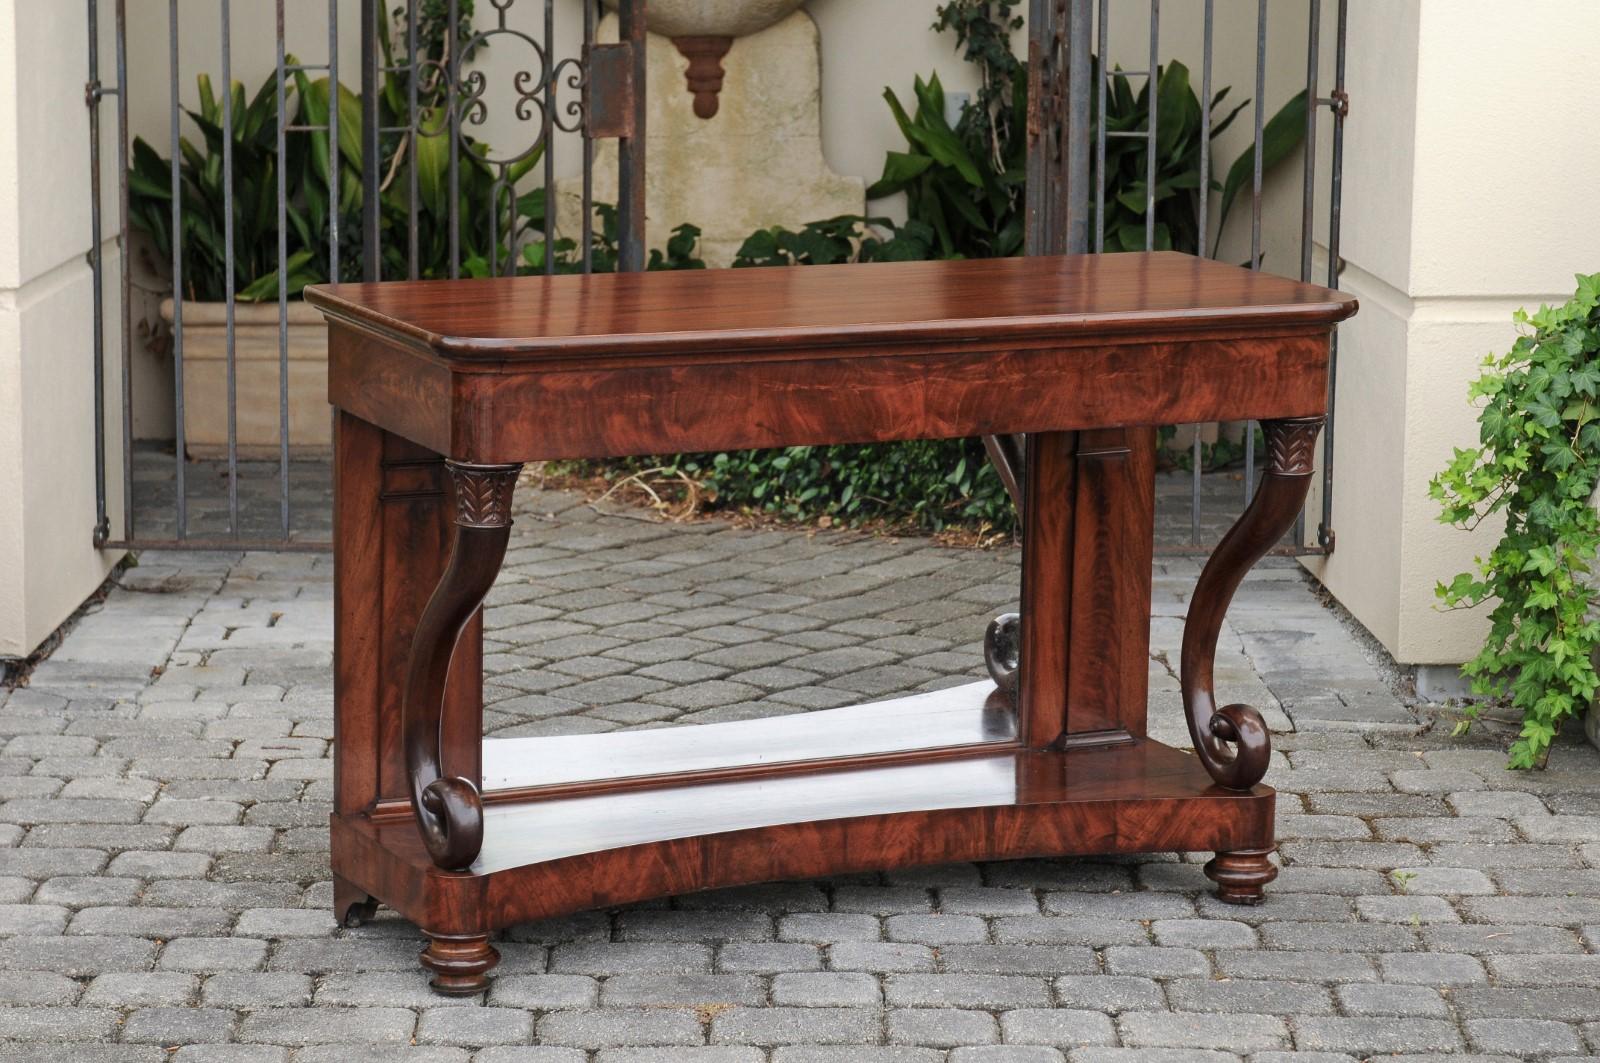 A French Charles X period mahogany console table from the 19th century, with cornucopia legs, lower shelf and mirror. Born in France during the first half of the 19th century, this exquisite mahogany console table features a rectangular top with